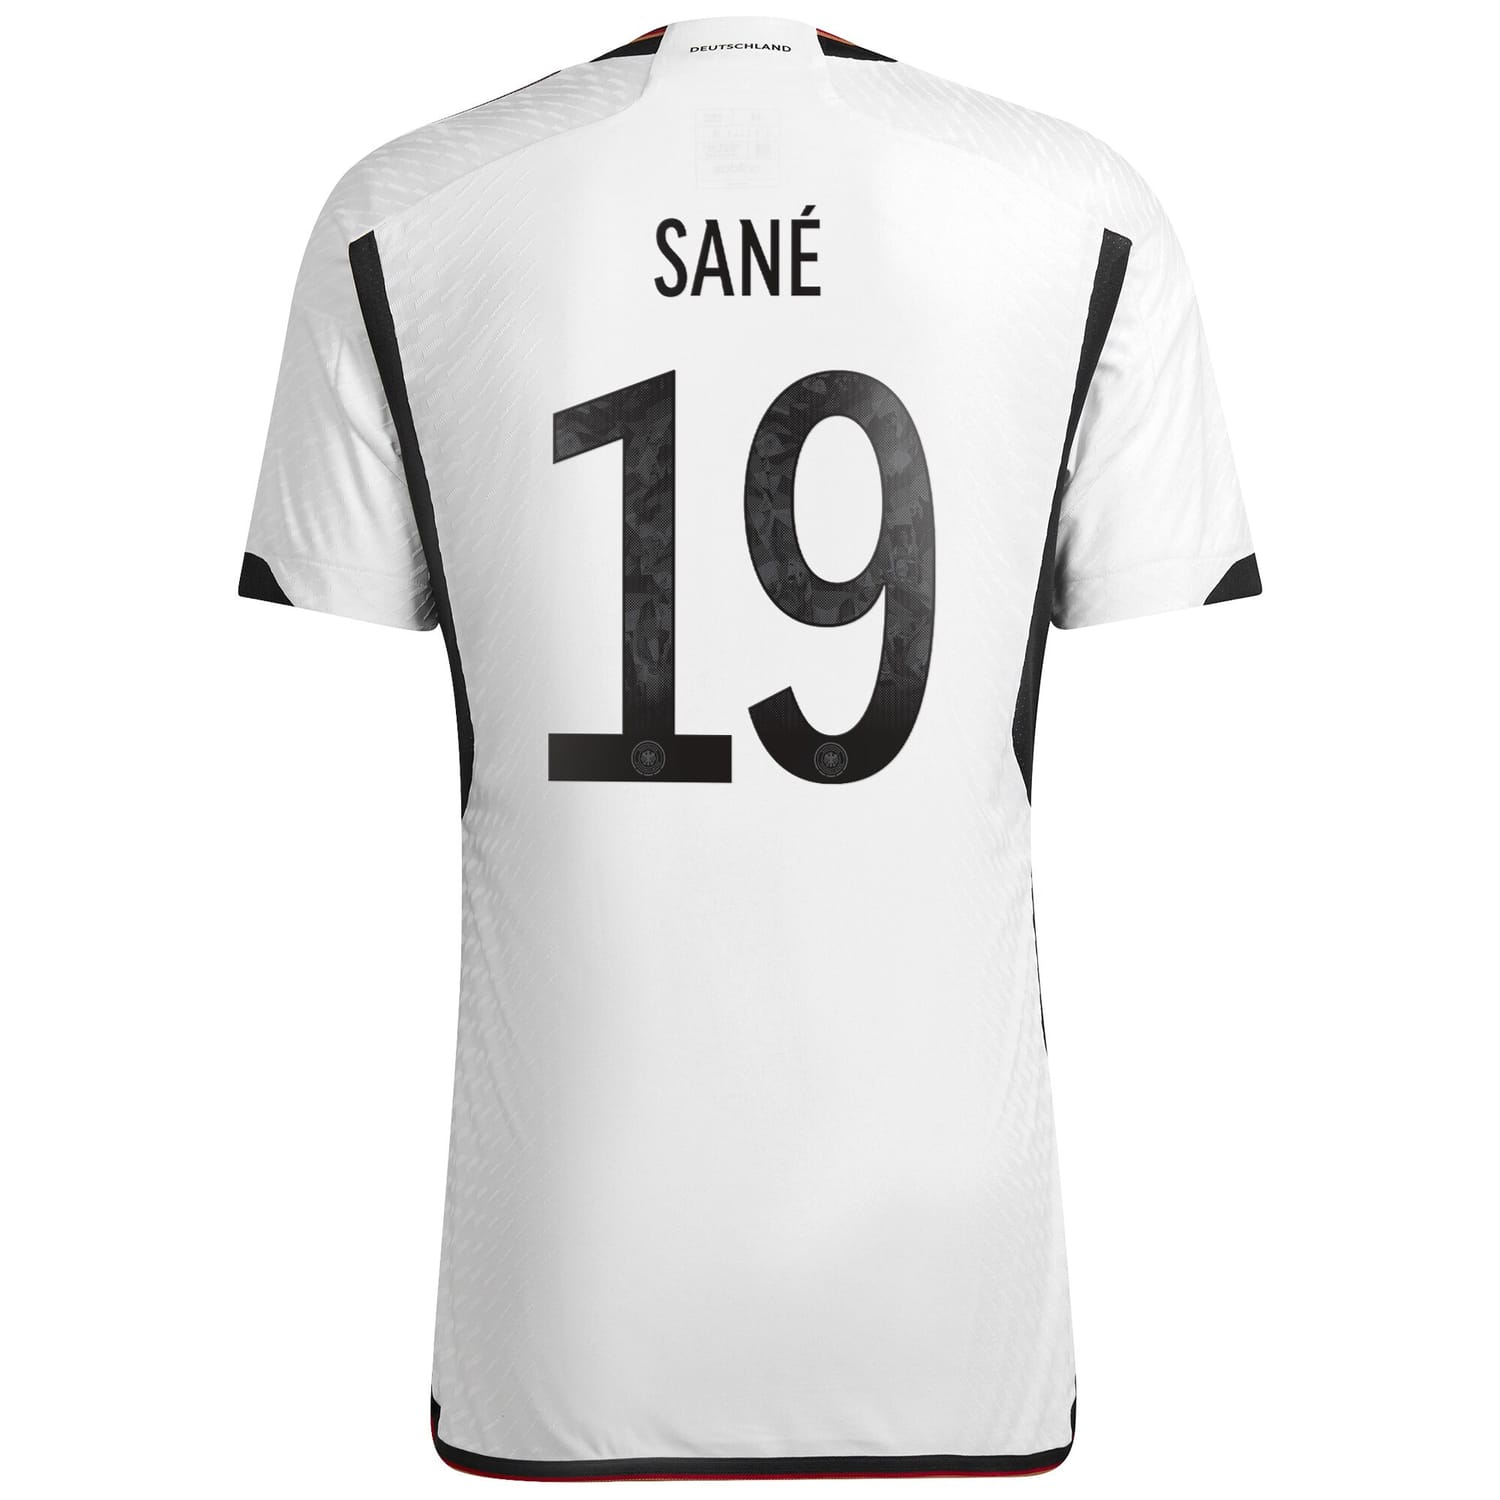 Germany National Team Home Authentic Jersey Shirt player Leroy Sané 19 printing for Men